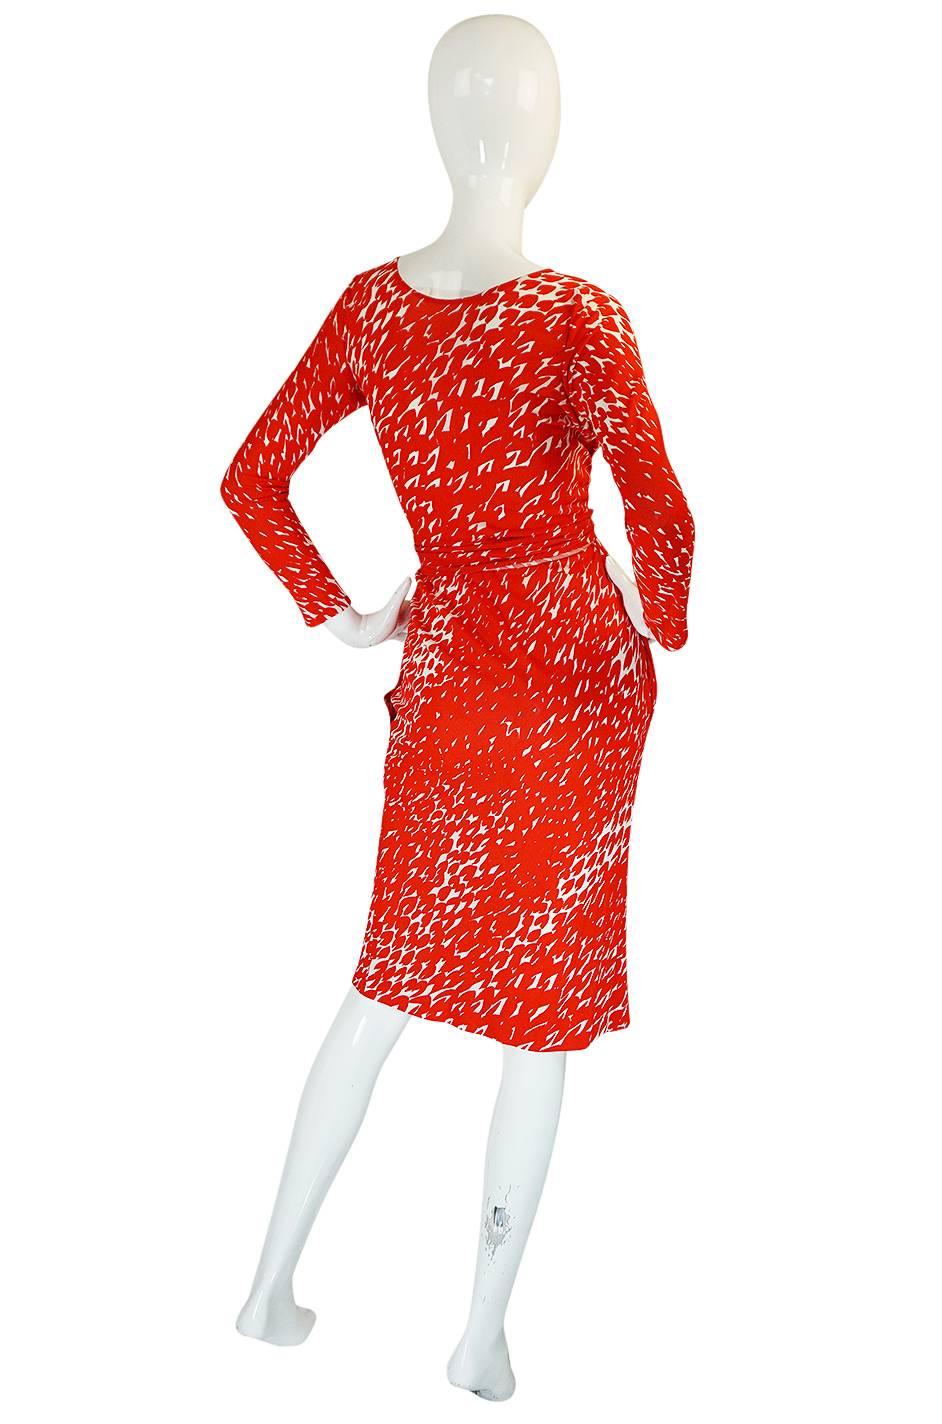 In 1975 Halston introduced menswear and his signature fragrance and he also showed this abstract prints and this fabulous pure red. In the reference pic within the photos here, you see a similar print on a longer more caftan dress. I also found the